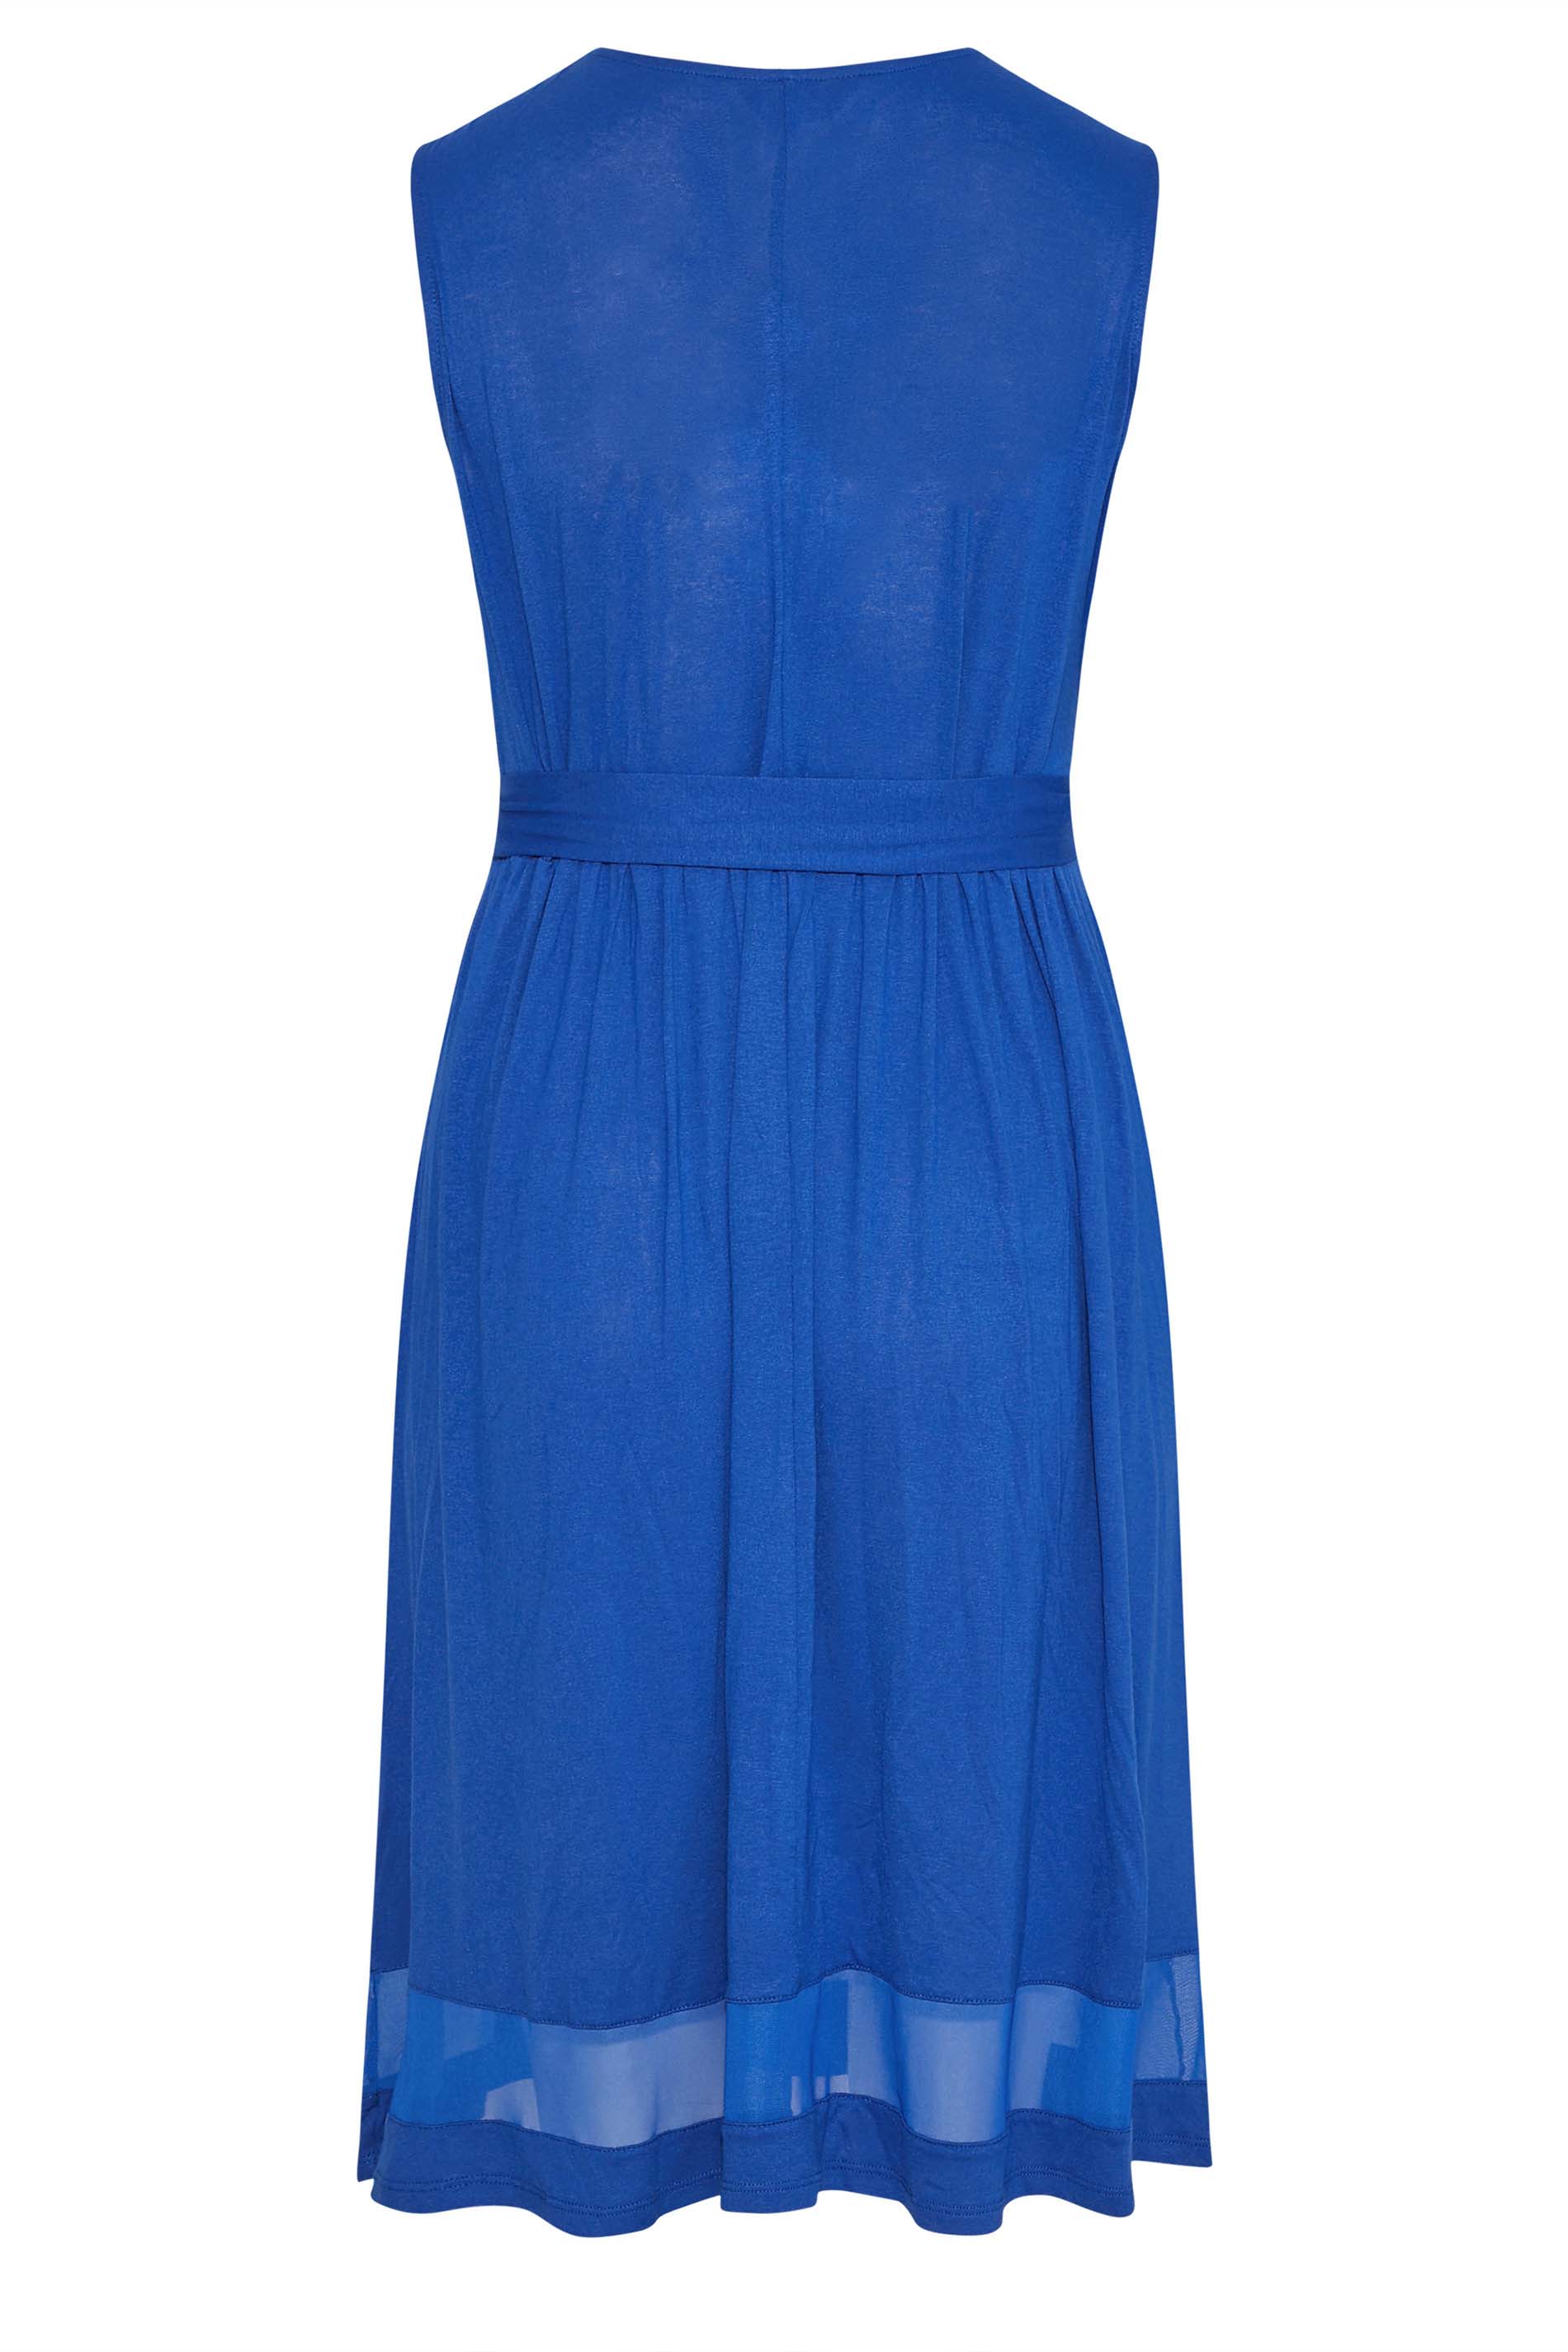 Robes Grande Taille Grande taille  Robes Patineuses | Curve Cobalt Blue Mesh Panel Skater Dress - OF18941